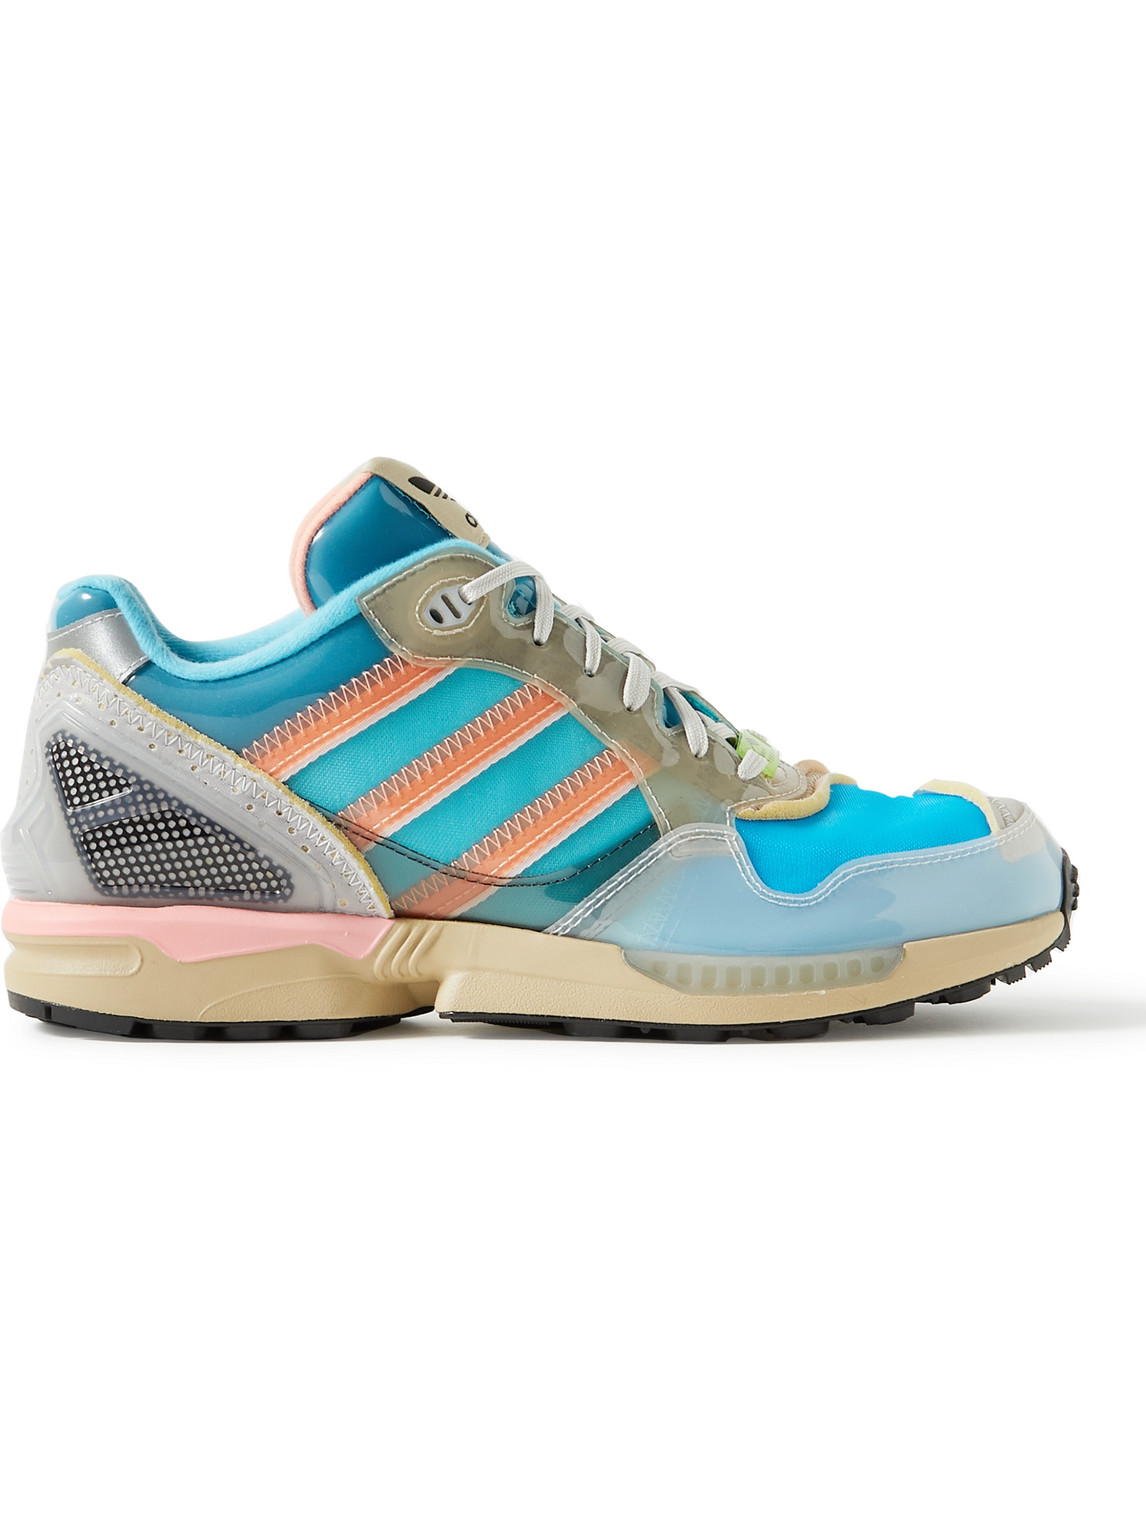 ADIDAS CONSORTIUM XZ0006 INSIDE OUT RUBBER-TRIMMED MESH trainers